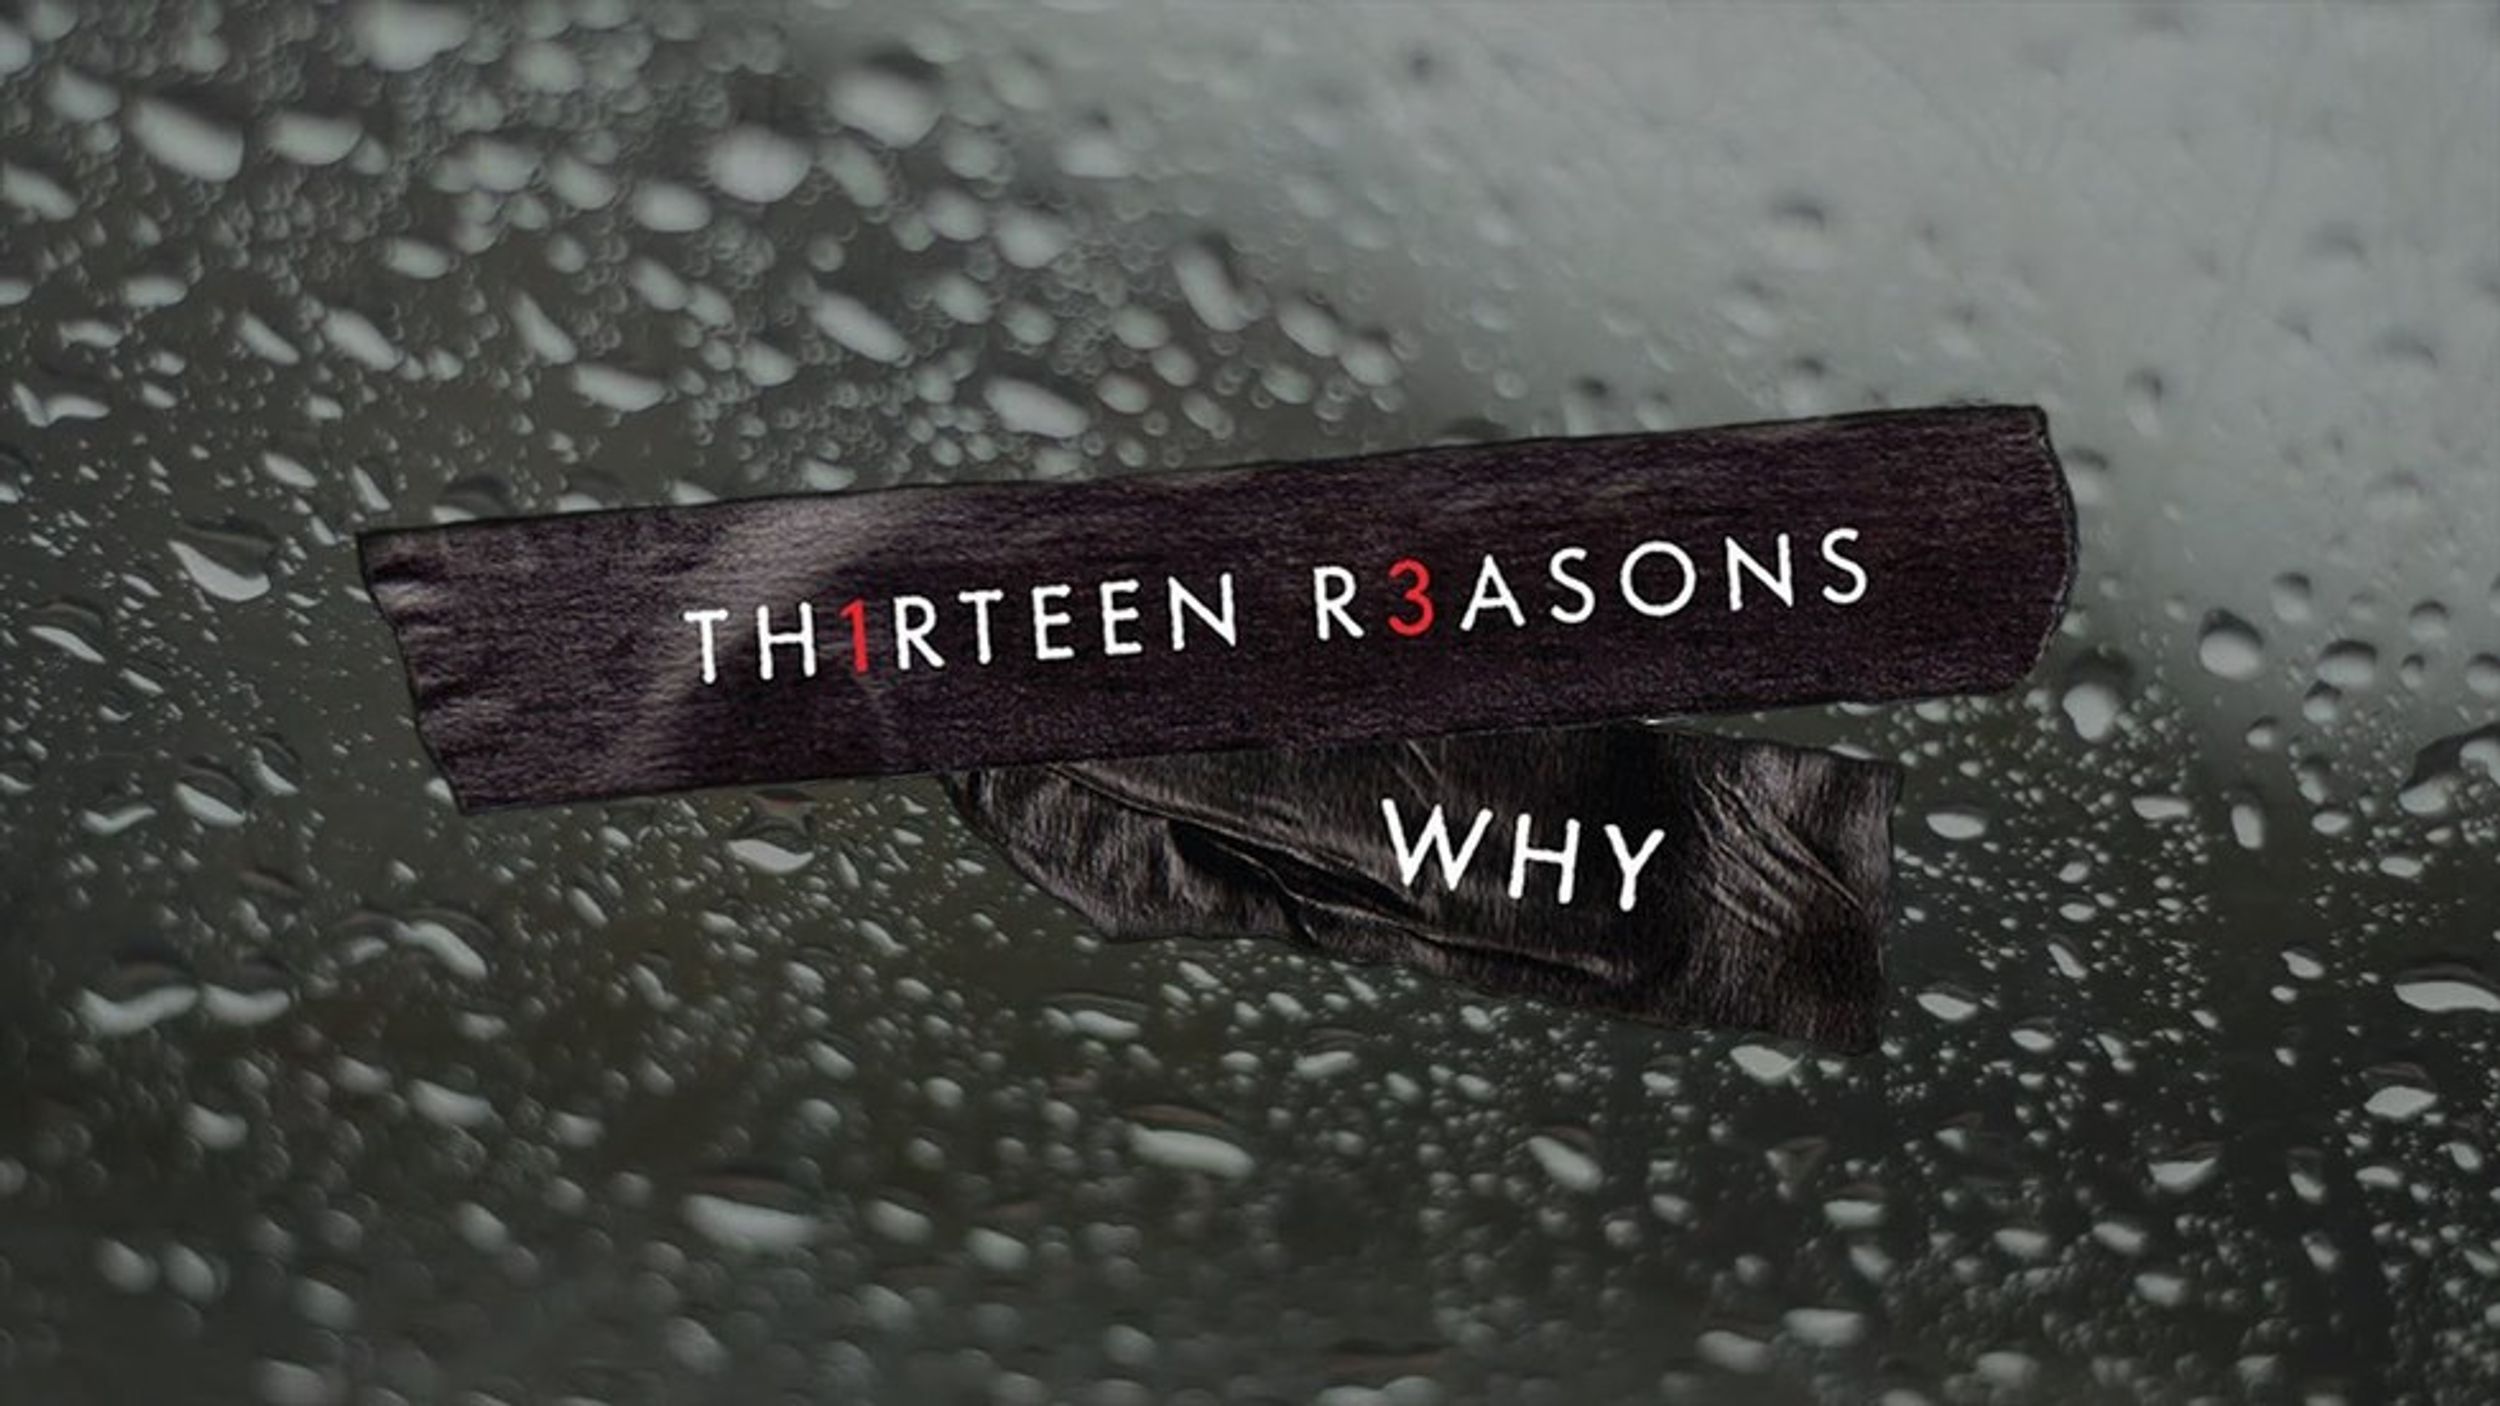 "Thirteen Reasons Why" Book Review